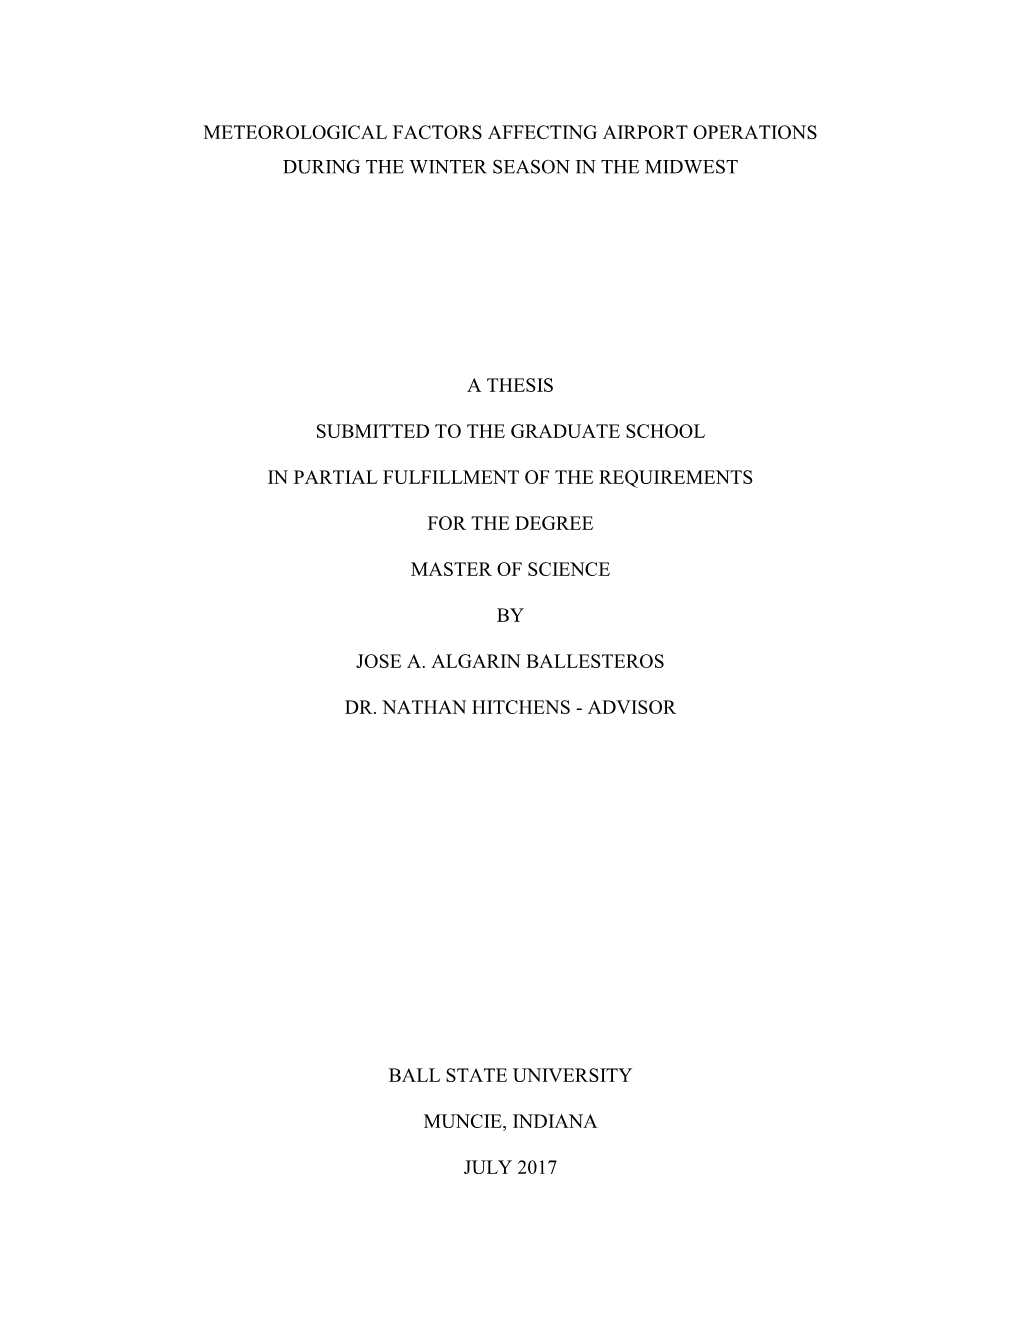 Meteorological Factors Affecting Airport Operations During the Winter Season in the Midwest a Thesis Submitted to the Graduate